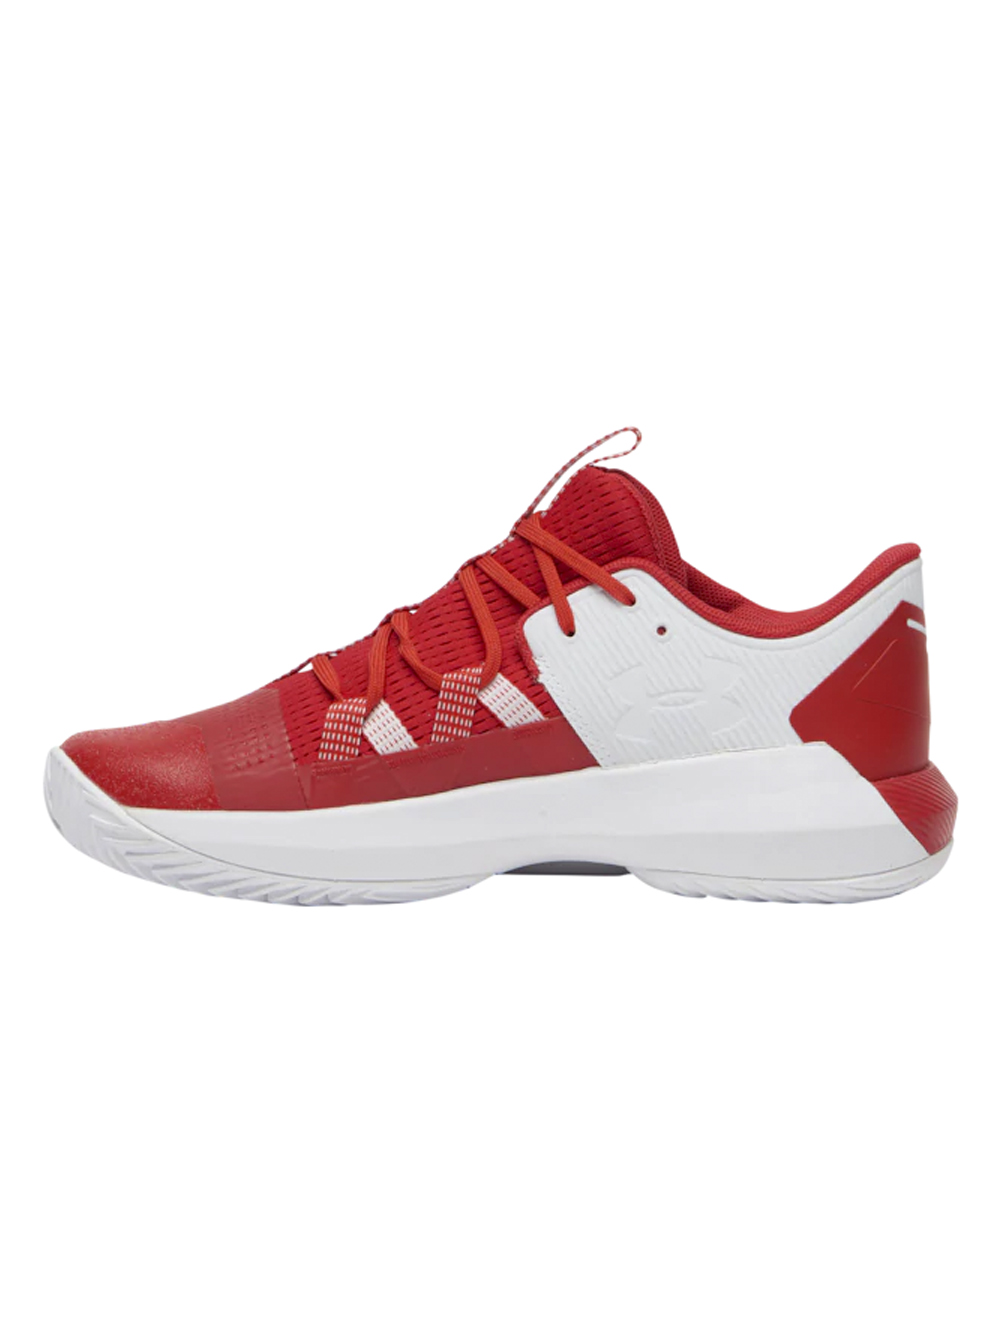 Under Armour Block City 2 Shoes Red White Midwest Volleyball